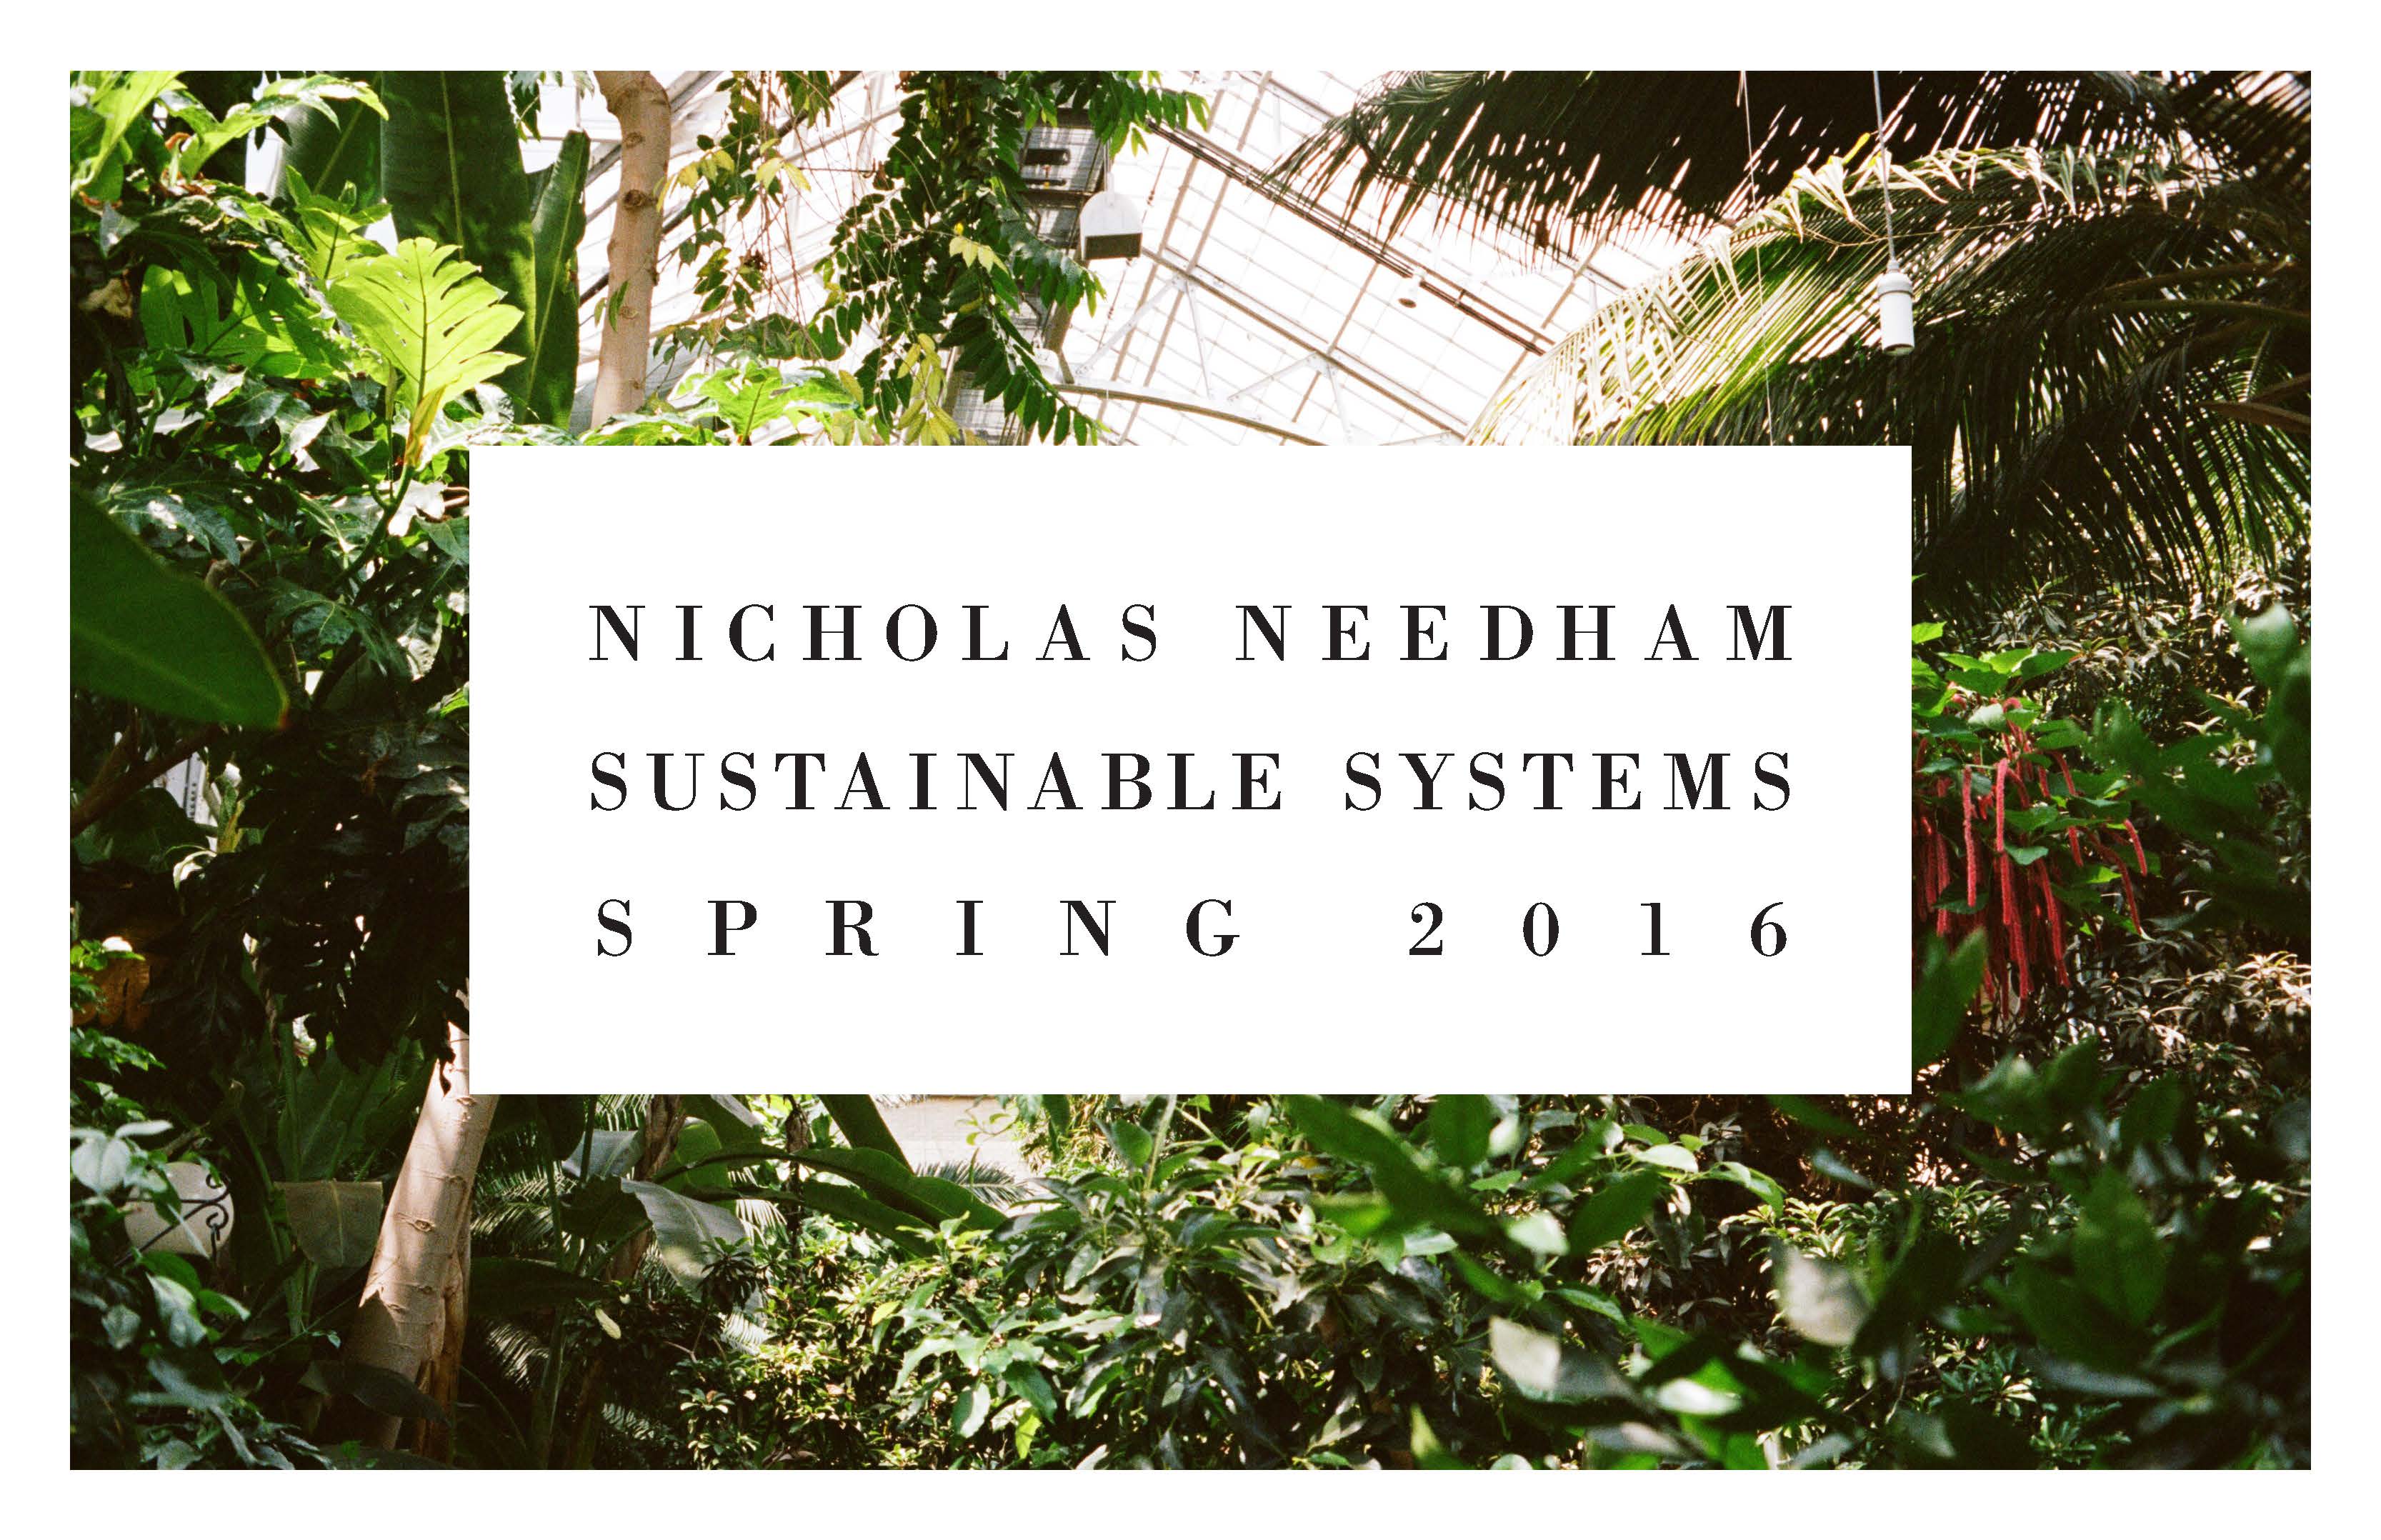 5/5/16 Sustainable Systems: Final Portfolio